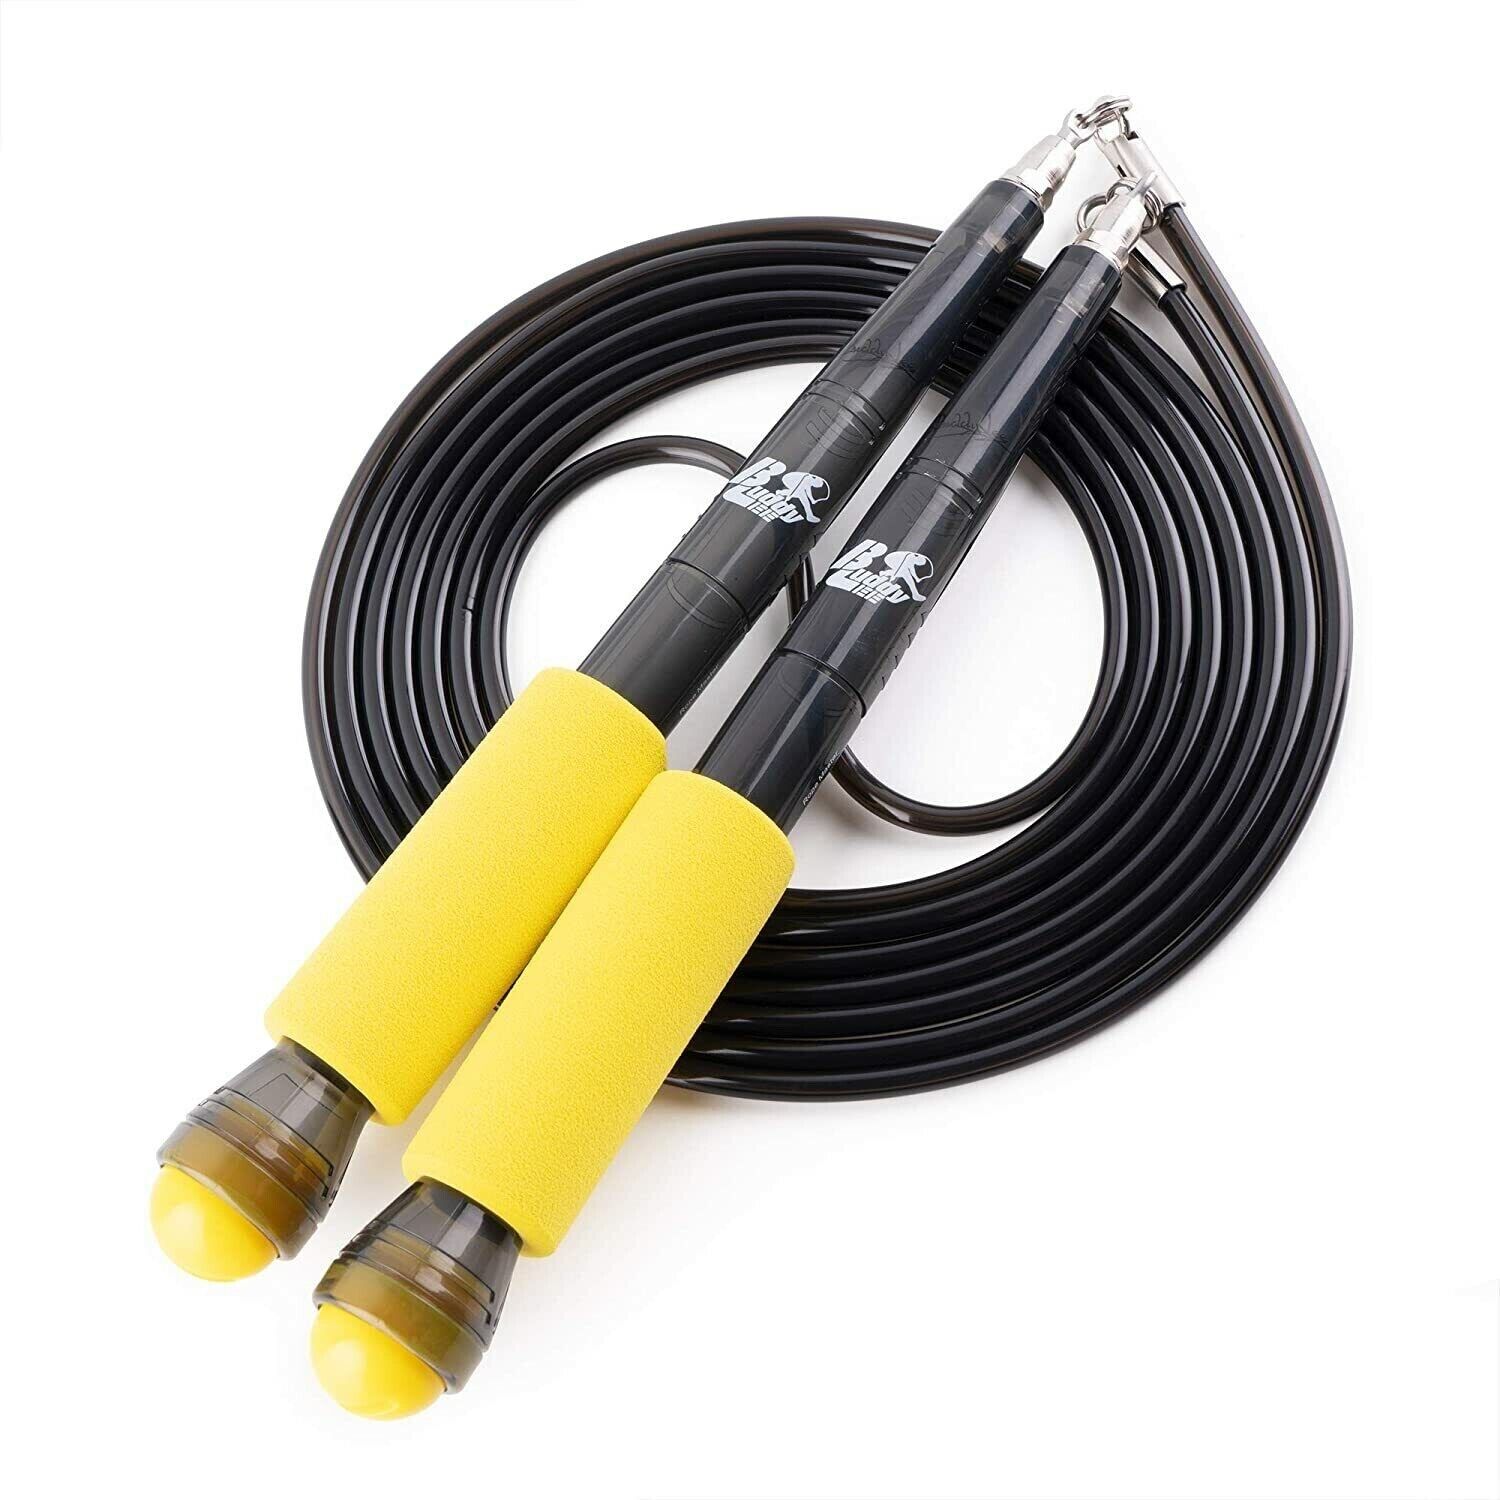 Buddy Lee | Limited Rope Master Jump Rope | Yellow Black | 100% Authentic